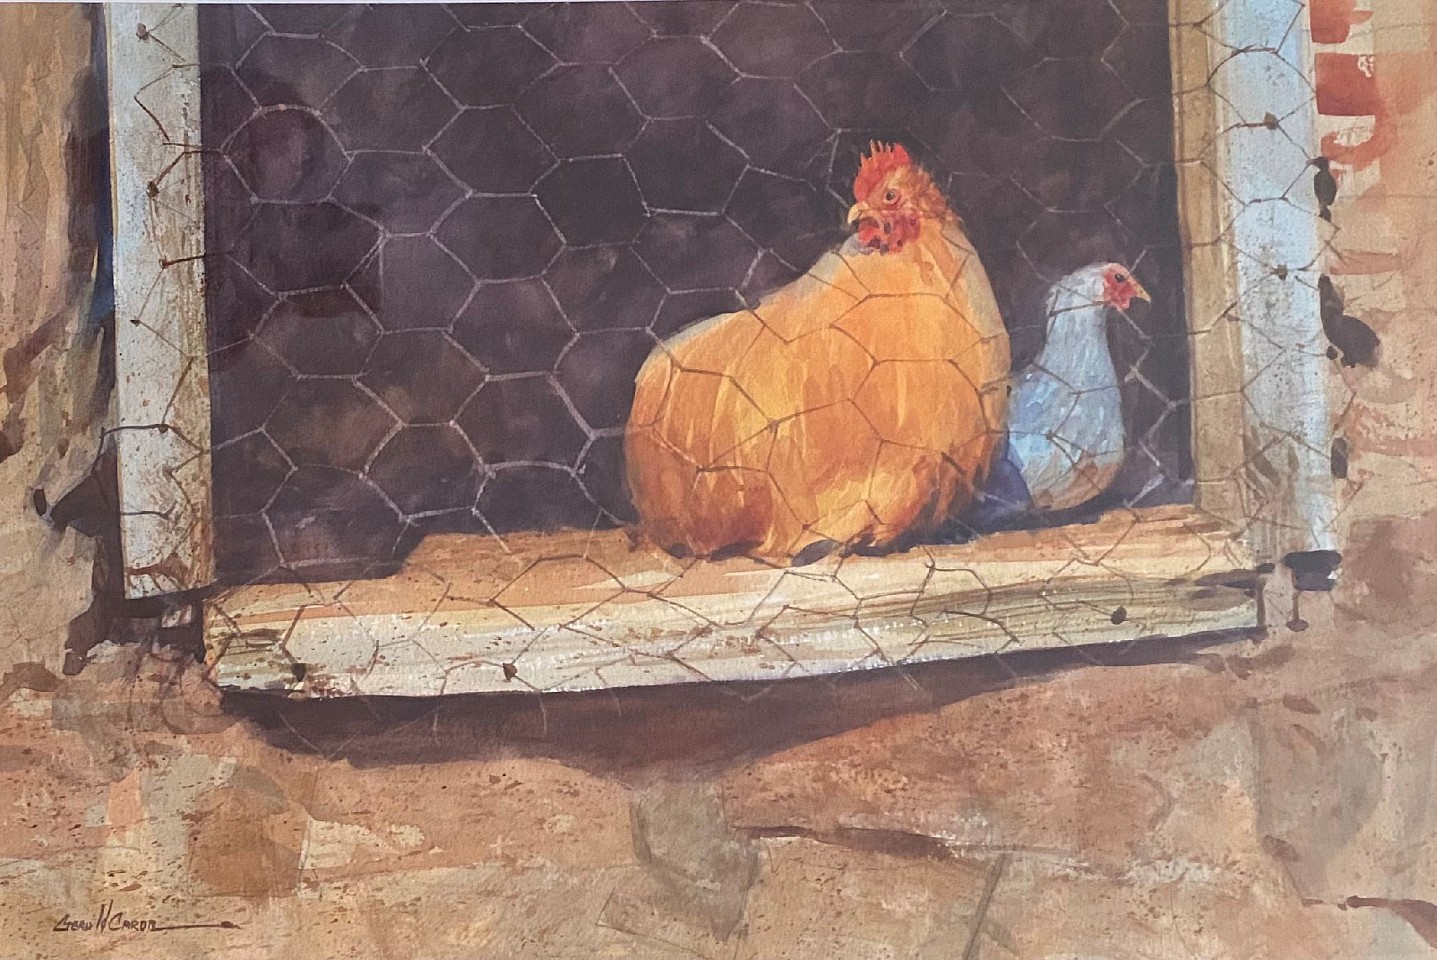 Jerry Caron, In the Coop
watercolor on paper, 13"" x 20""
NC 0223.09
$1,200